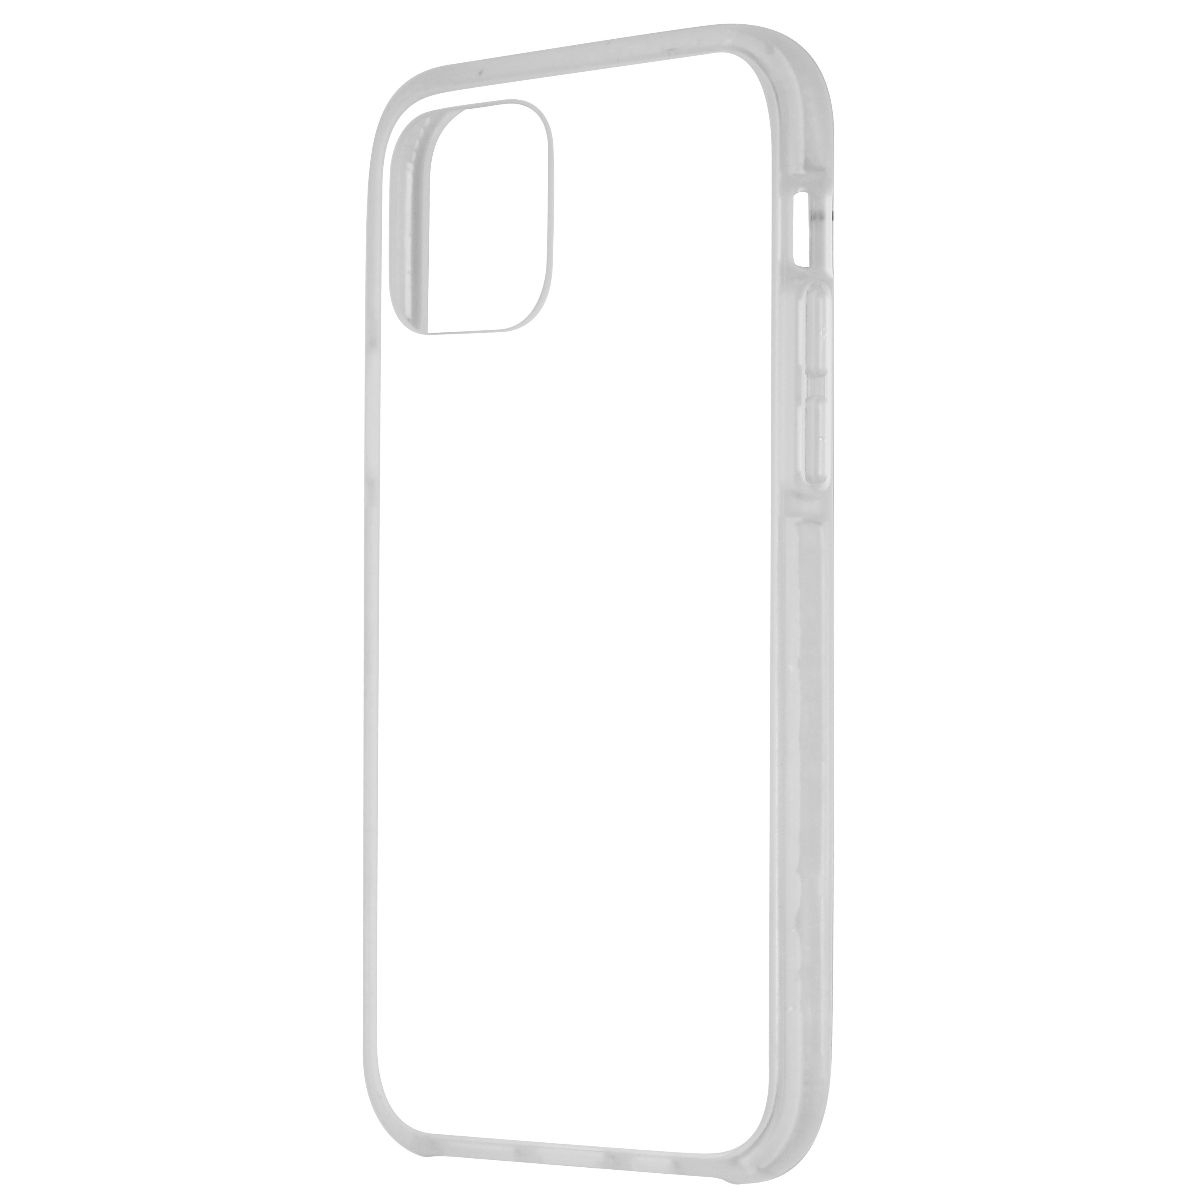 Impact Gel Crusader Chroma Series Case For Apple IPhone 11 Pro - Frost